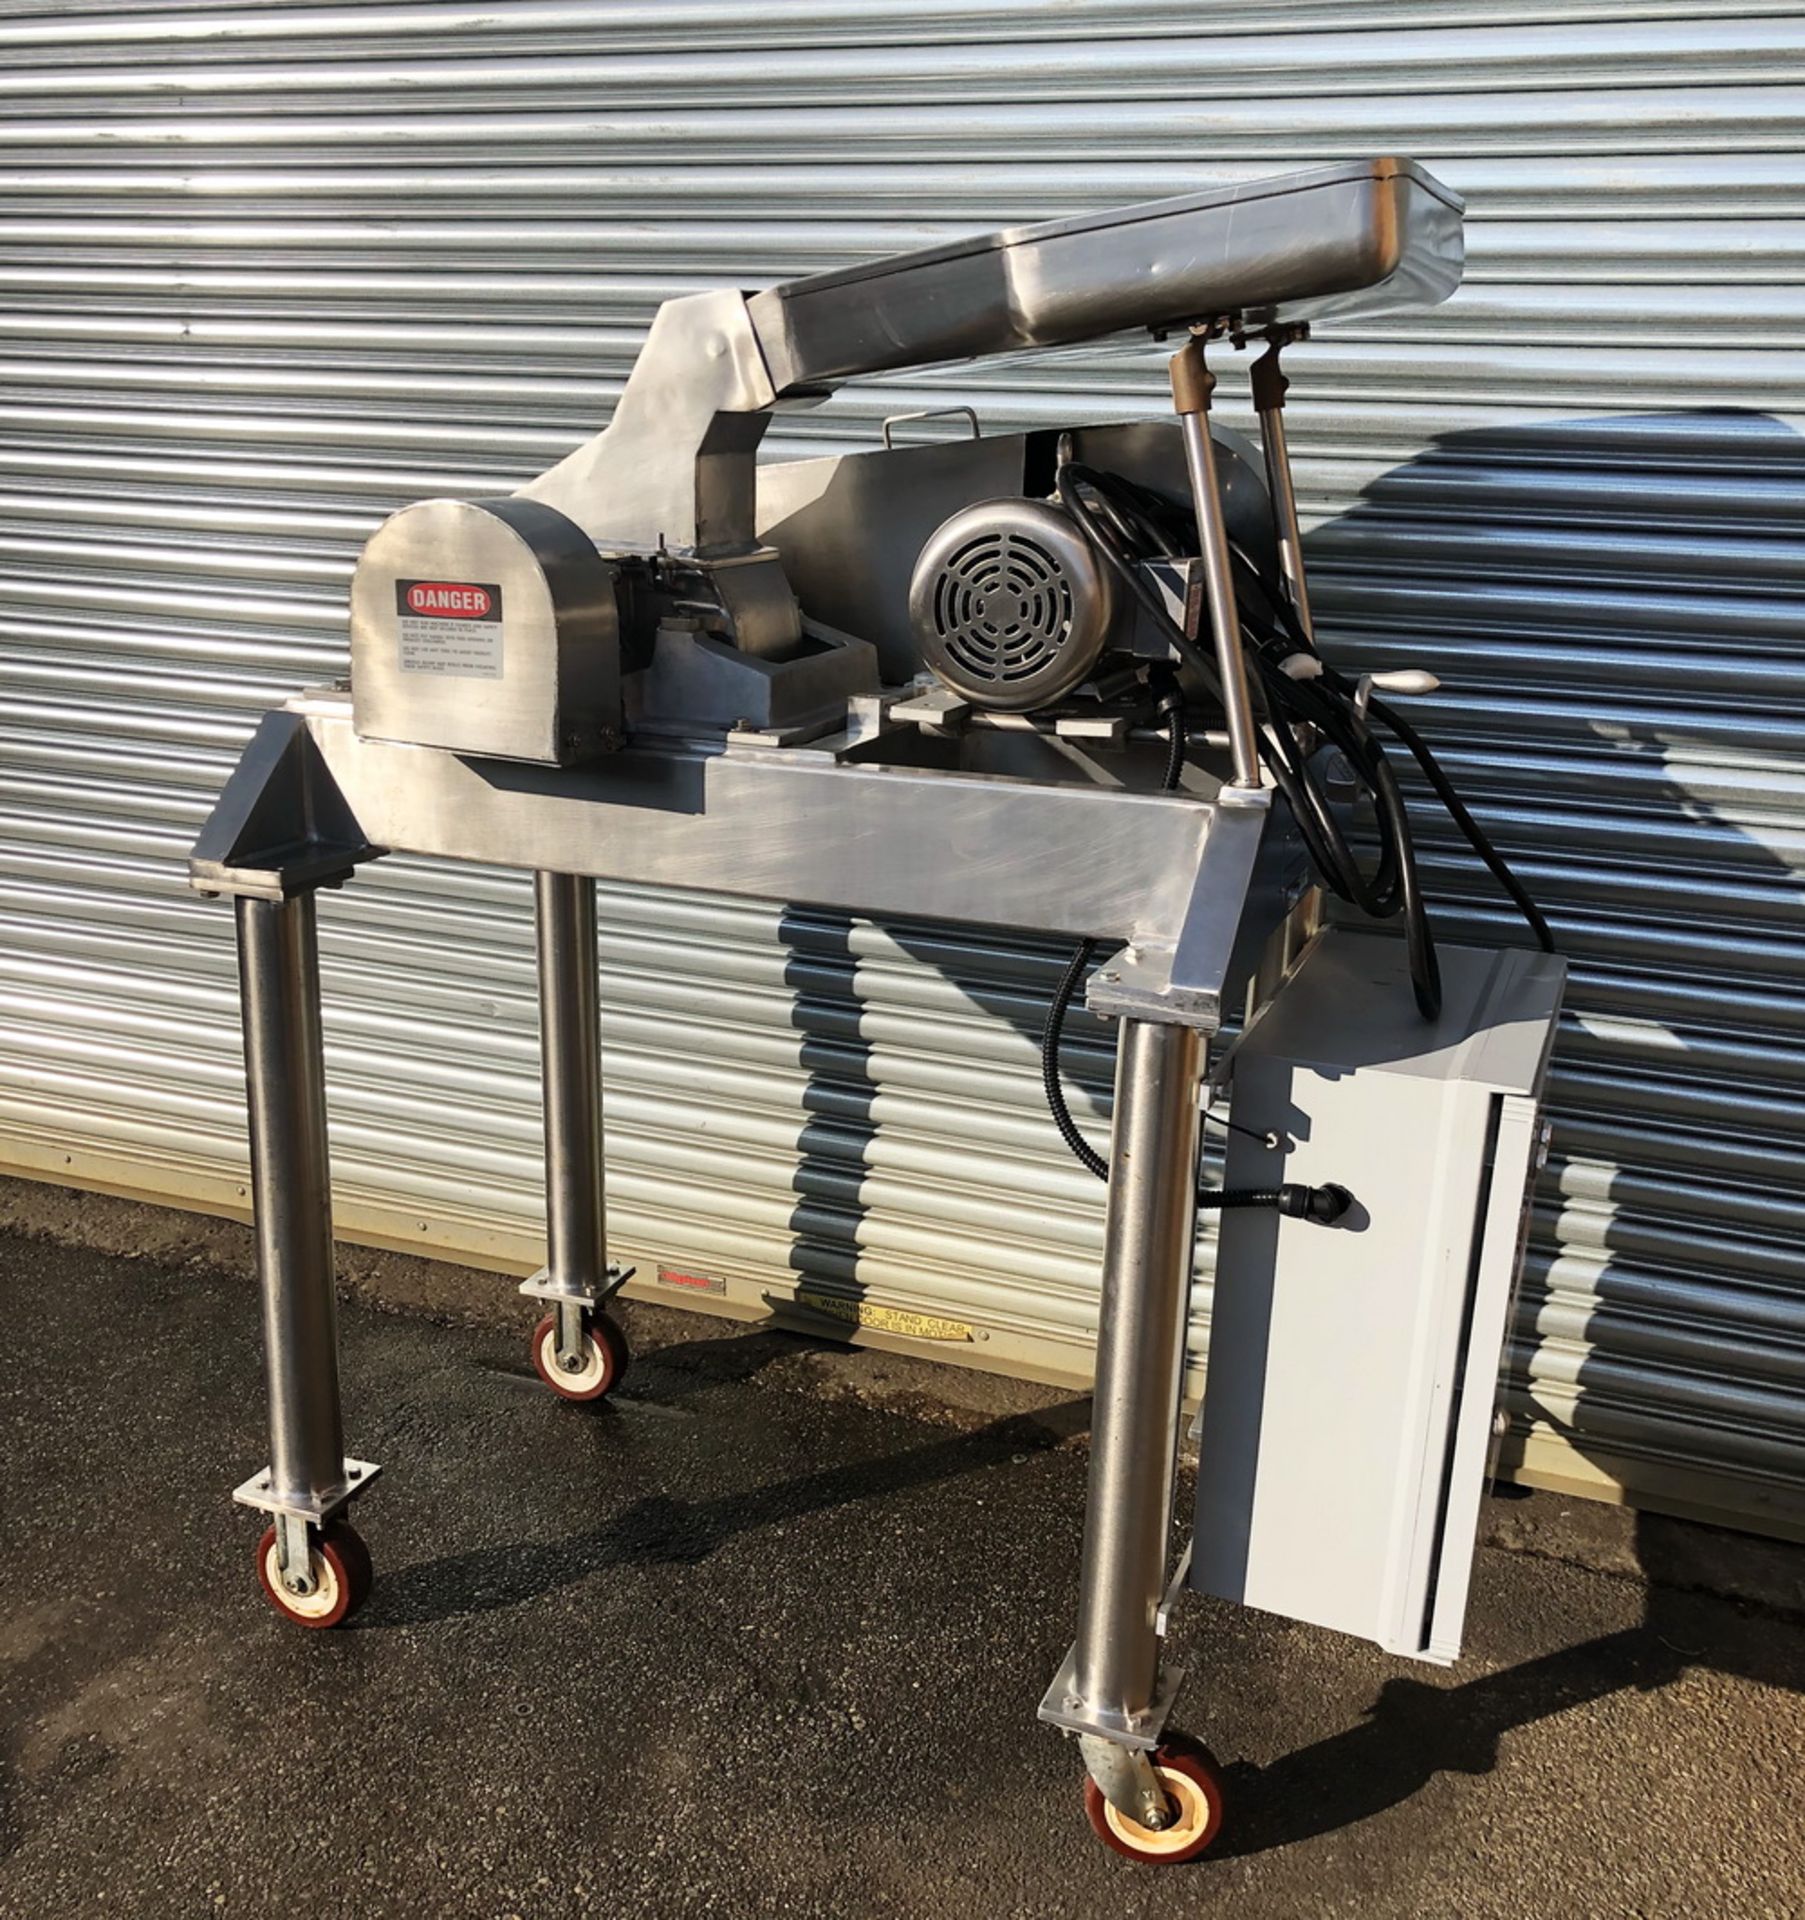 Fitzpatrick 5HP Stainless Steel Fitzmill (Comminutor), Model DASO6 - Image 11 of 17